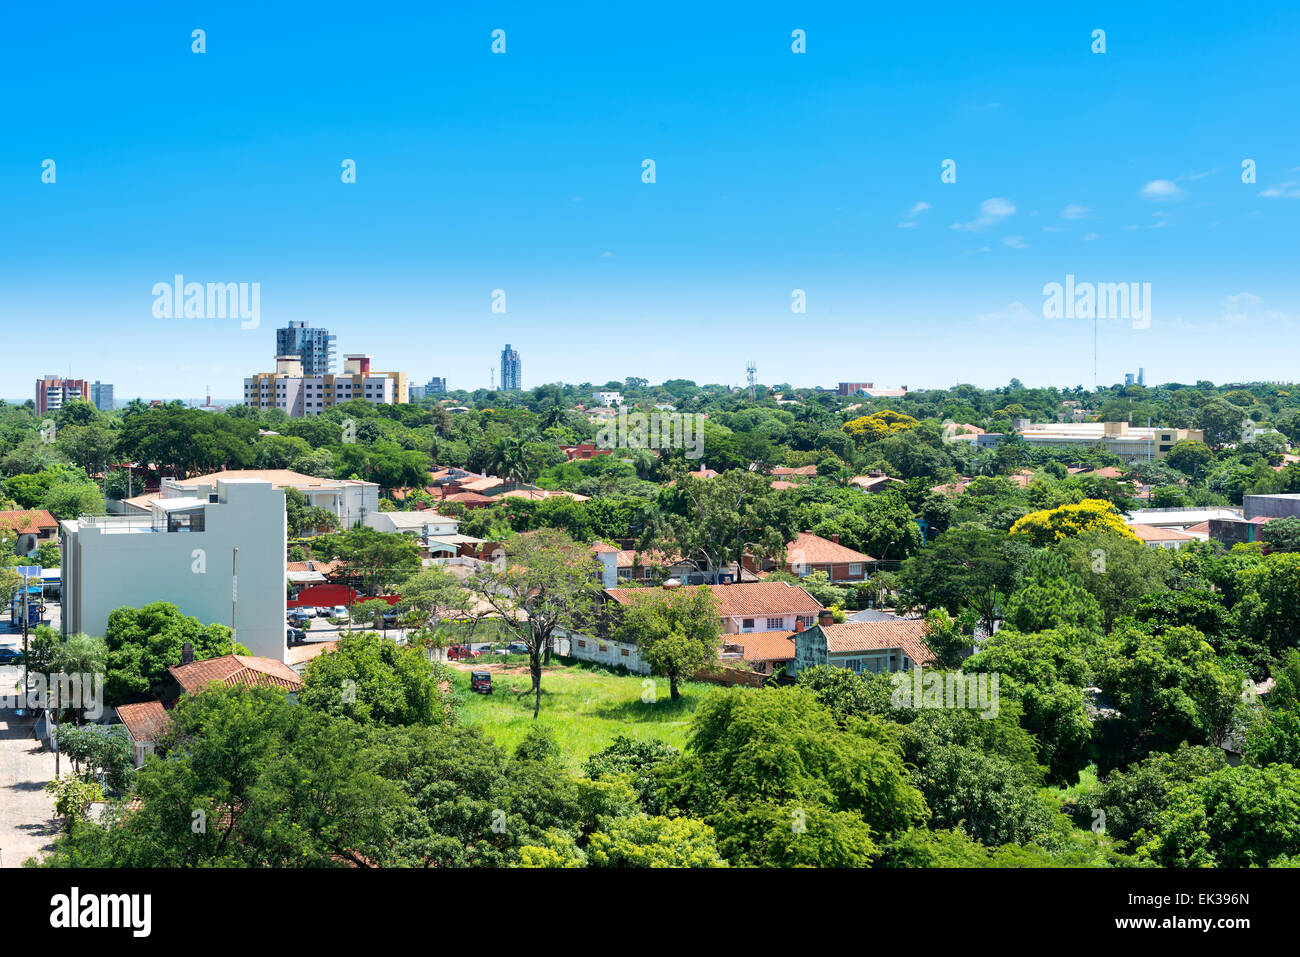 View of a residential neighborhood at Asuncion, Paraguay Stock Photo